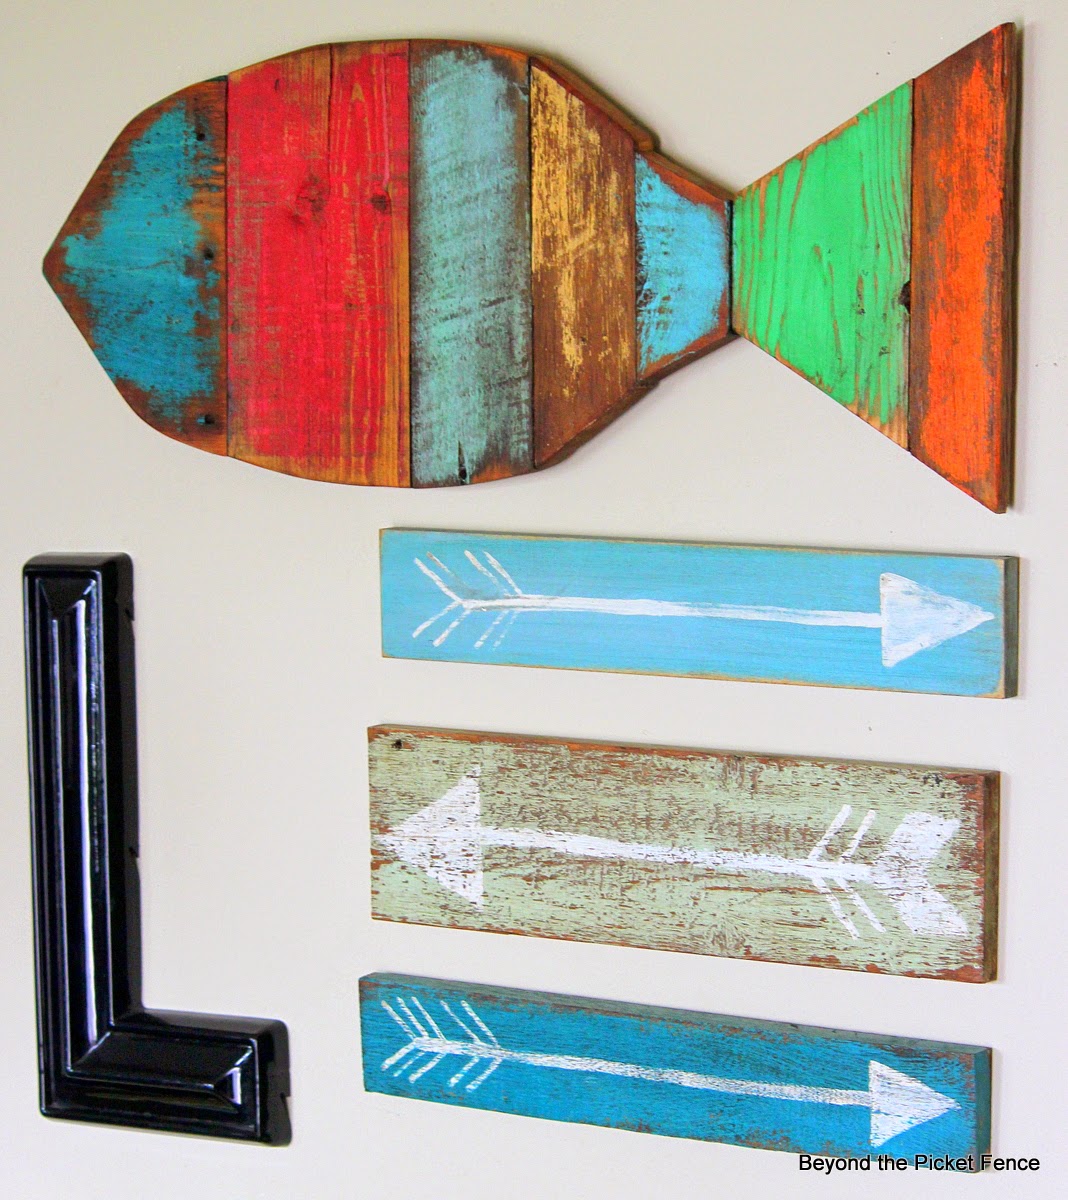 reclaimed salvaged scrap wood fish art http://bec4-beyondthepicketfence.blogspot.com/2014/06/here-fishy-fishy-fishy.html